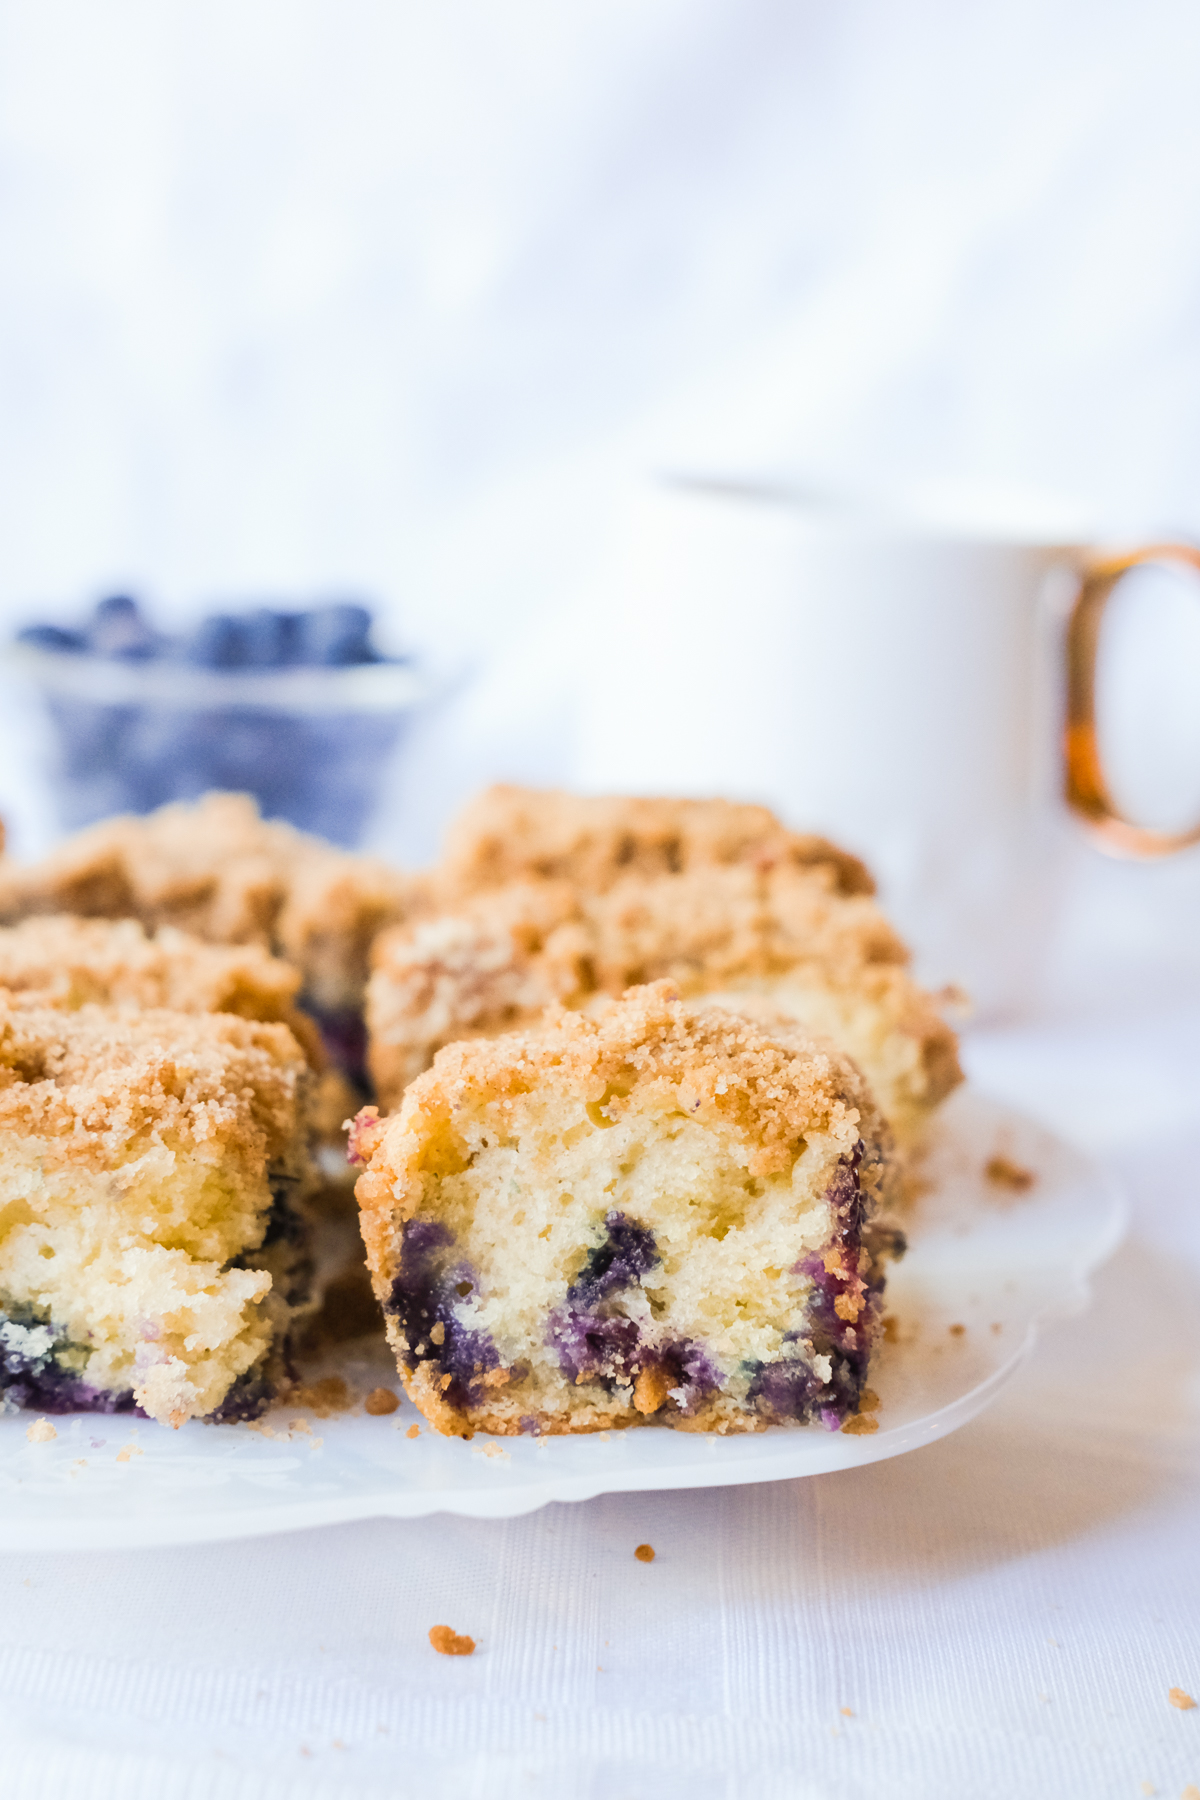 Crumbly Blueberry Coffee Cake Recipe